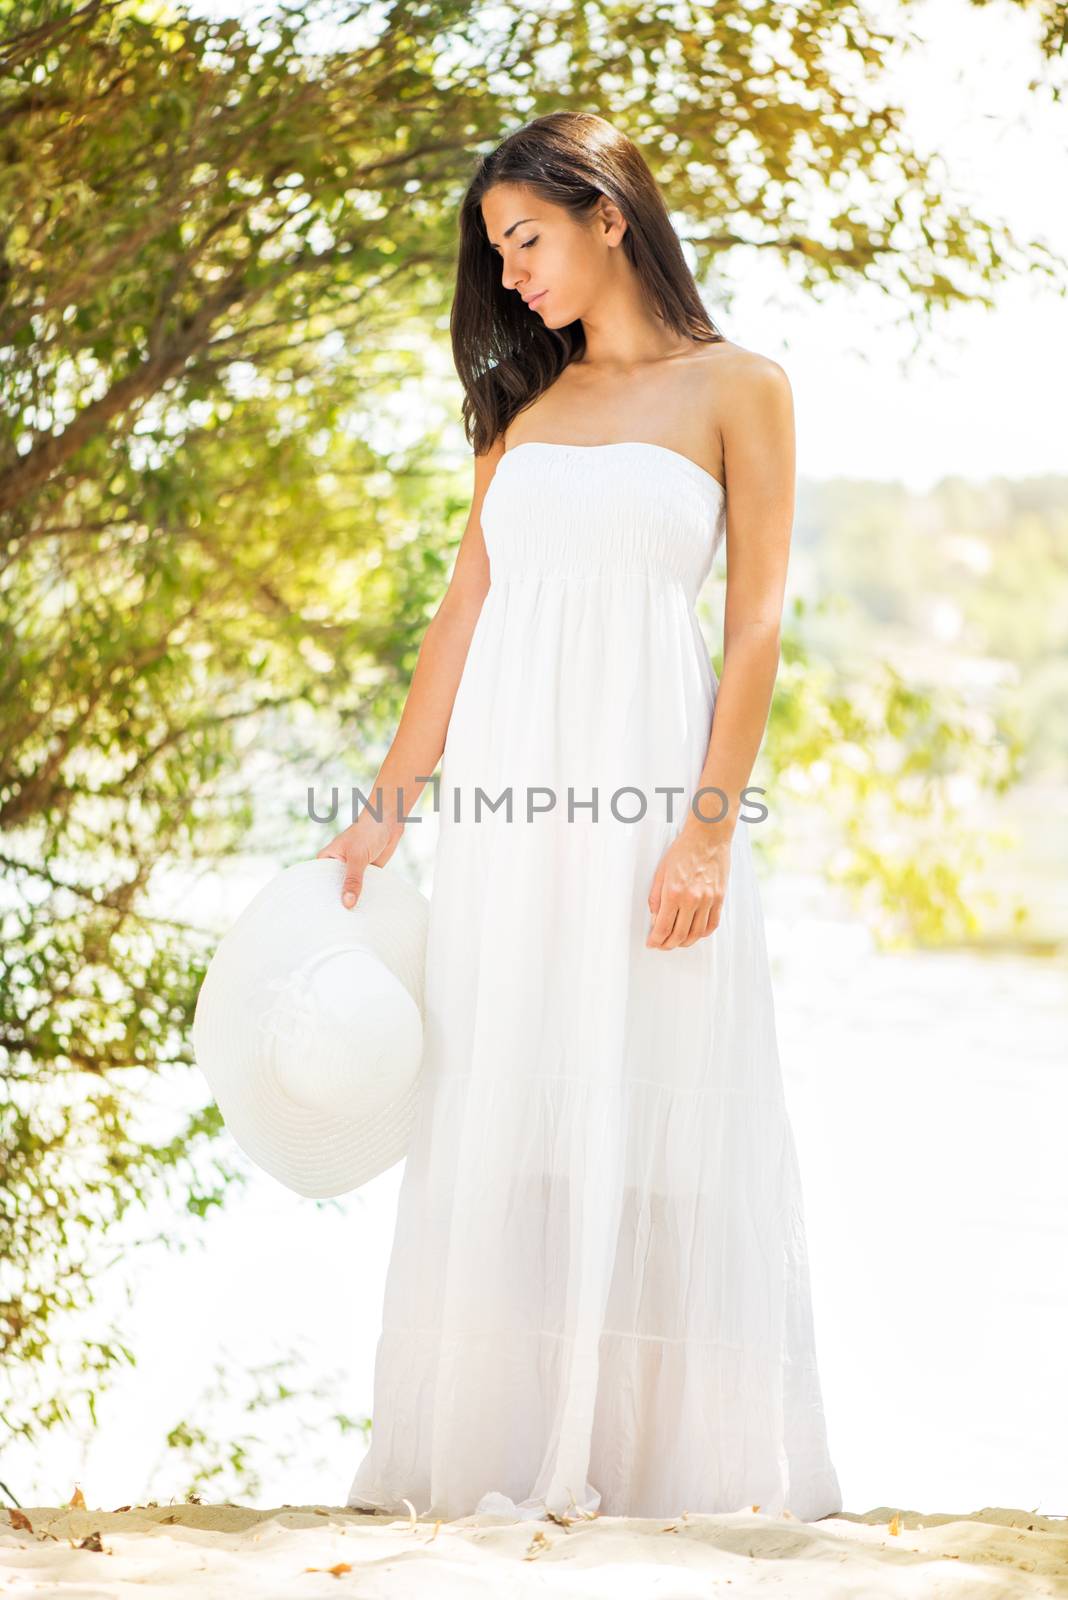 Young beautiful woman in white dress relaxing in the nature.